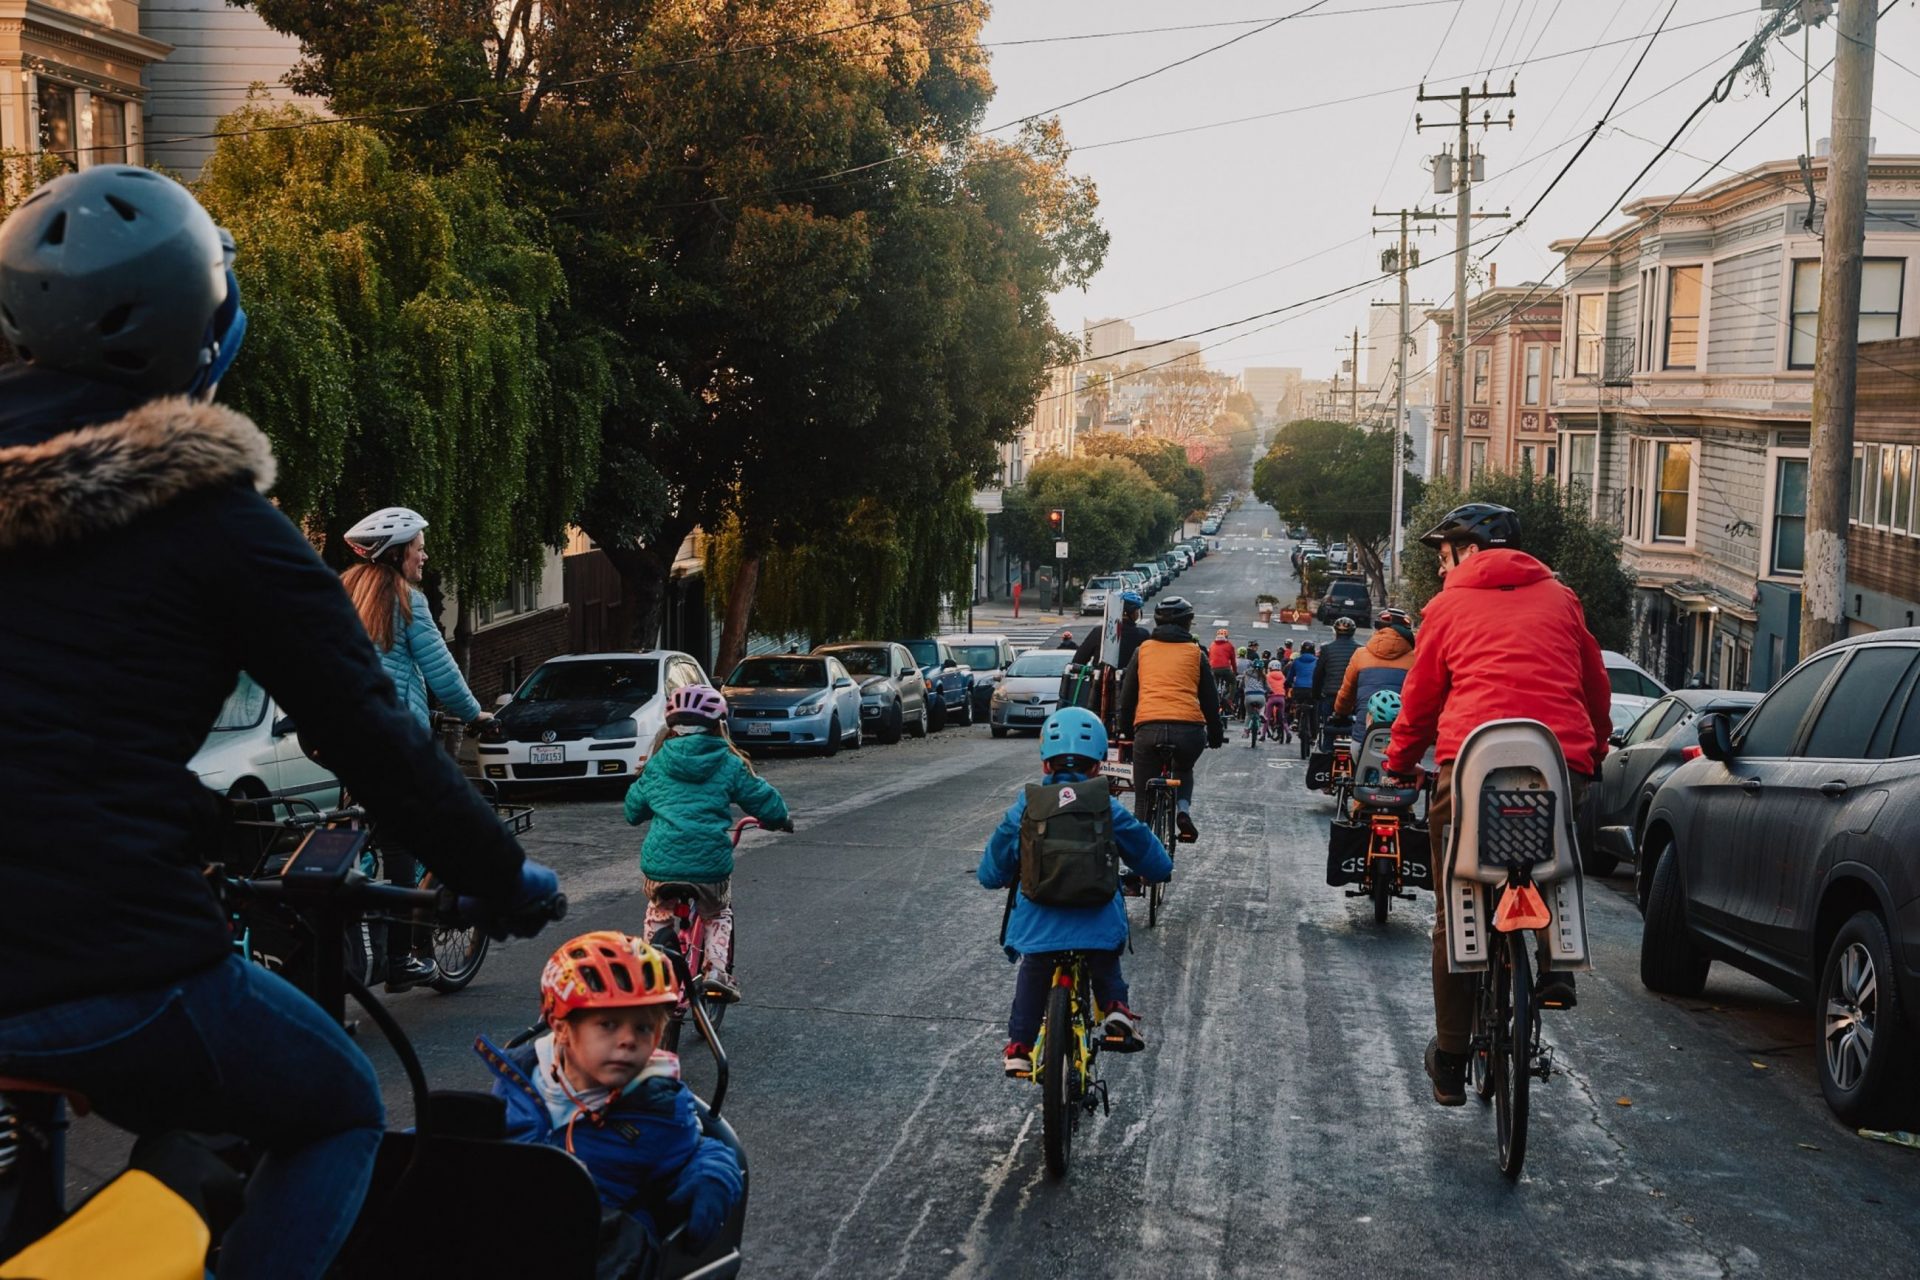 A pack of students and parents commute to school on bicycles in San Francisco on Jan. 14 as part of a “bike bus.”Photographer: Bryan Banducci/Bloomberg